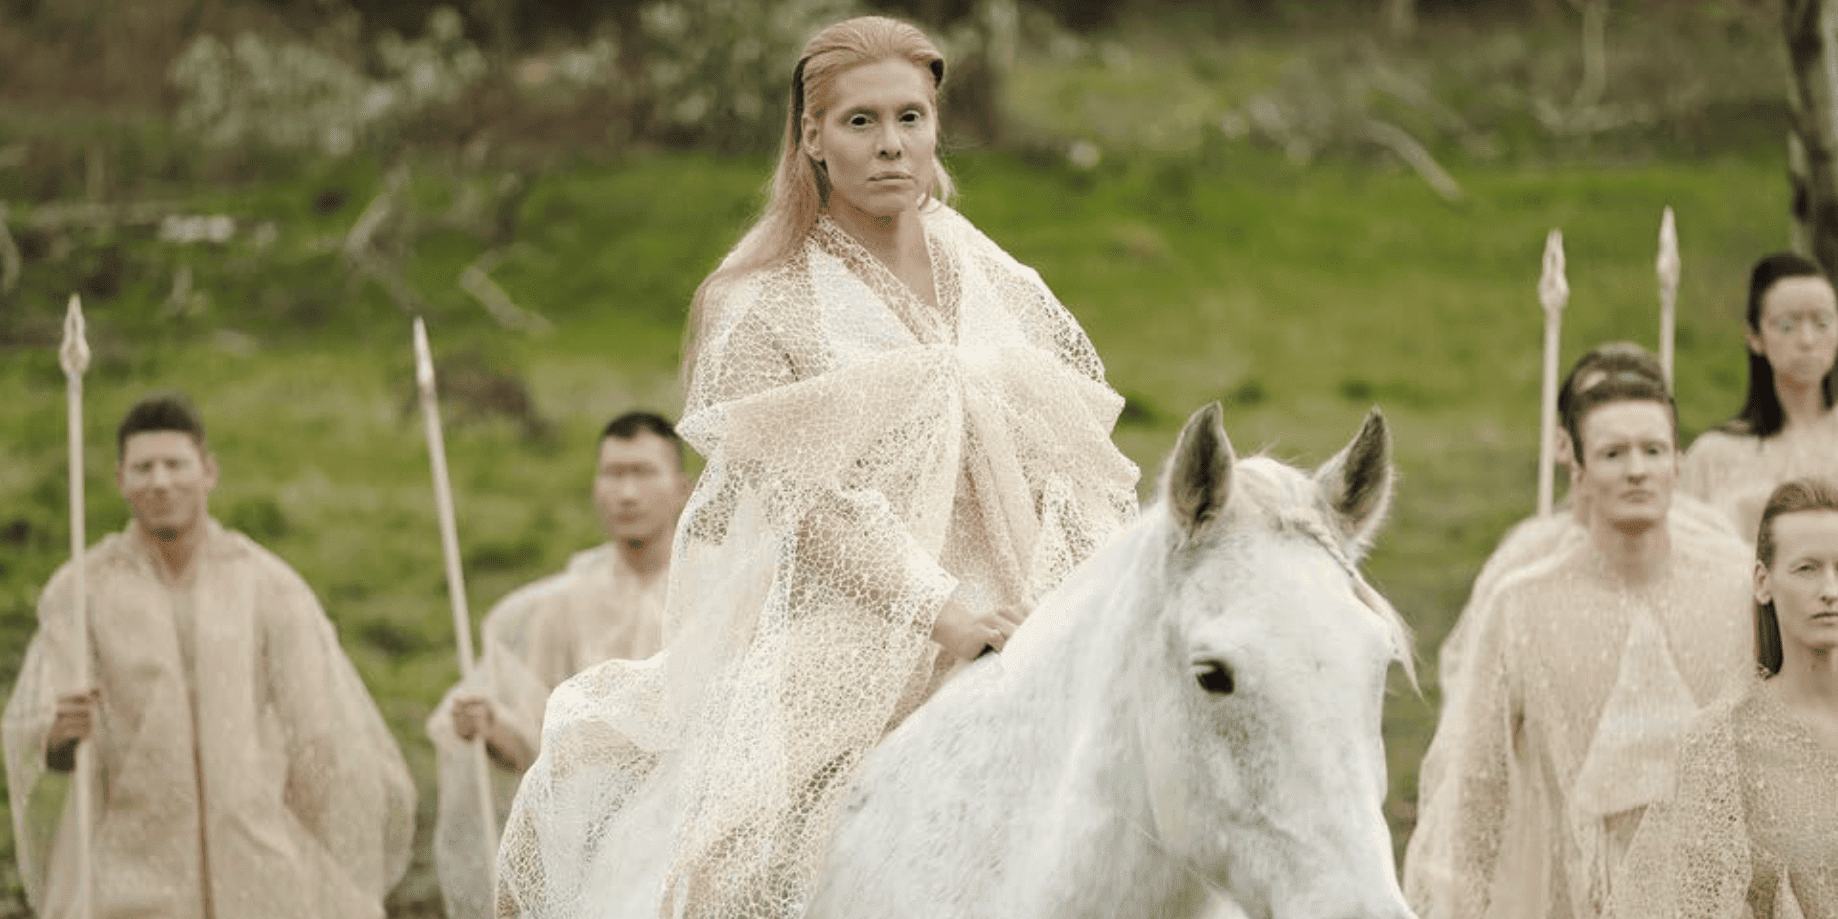 The Fairy Queen (Candis Cayne) rides a horse while surrounded by an army of fairies threateningly holding spears in this image from McNamara Moving Company.